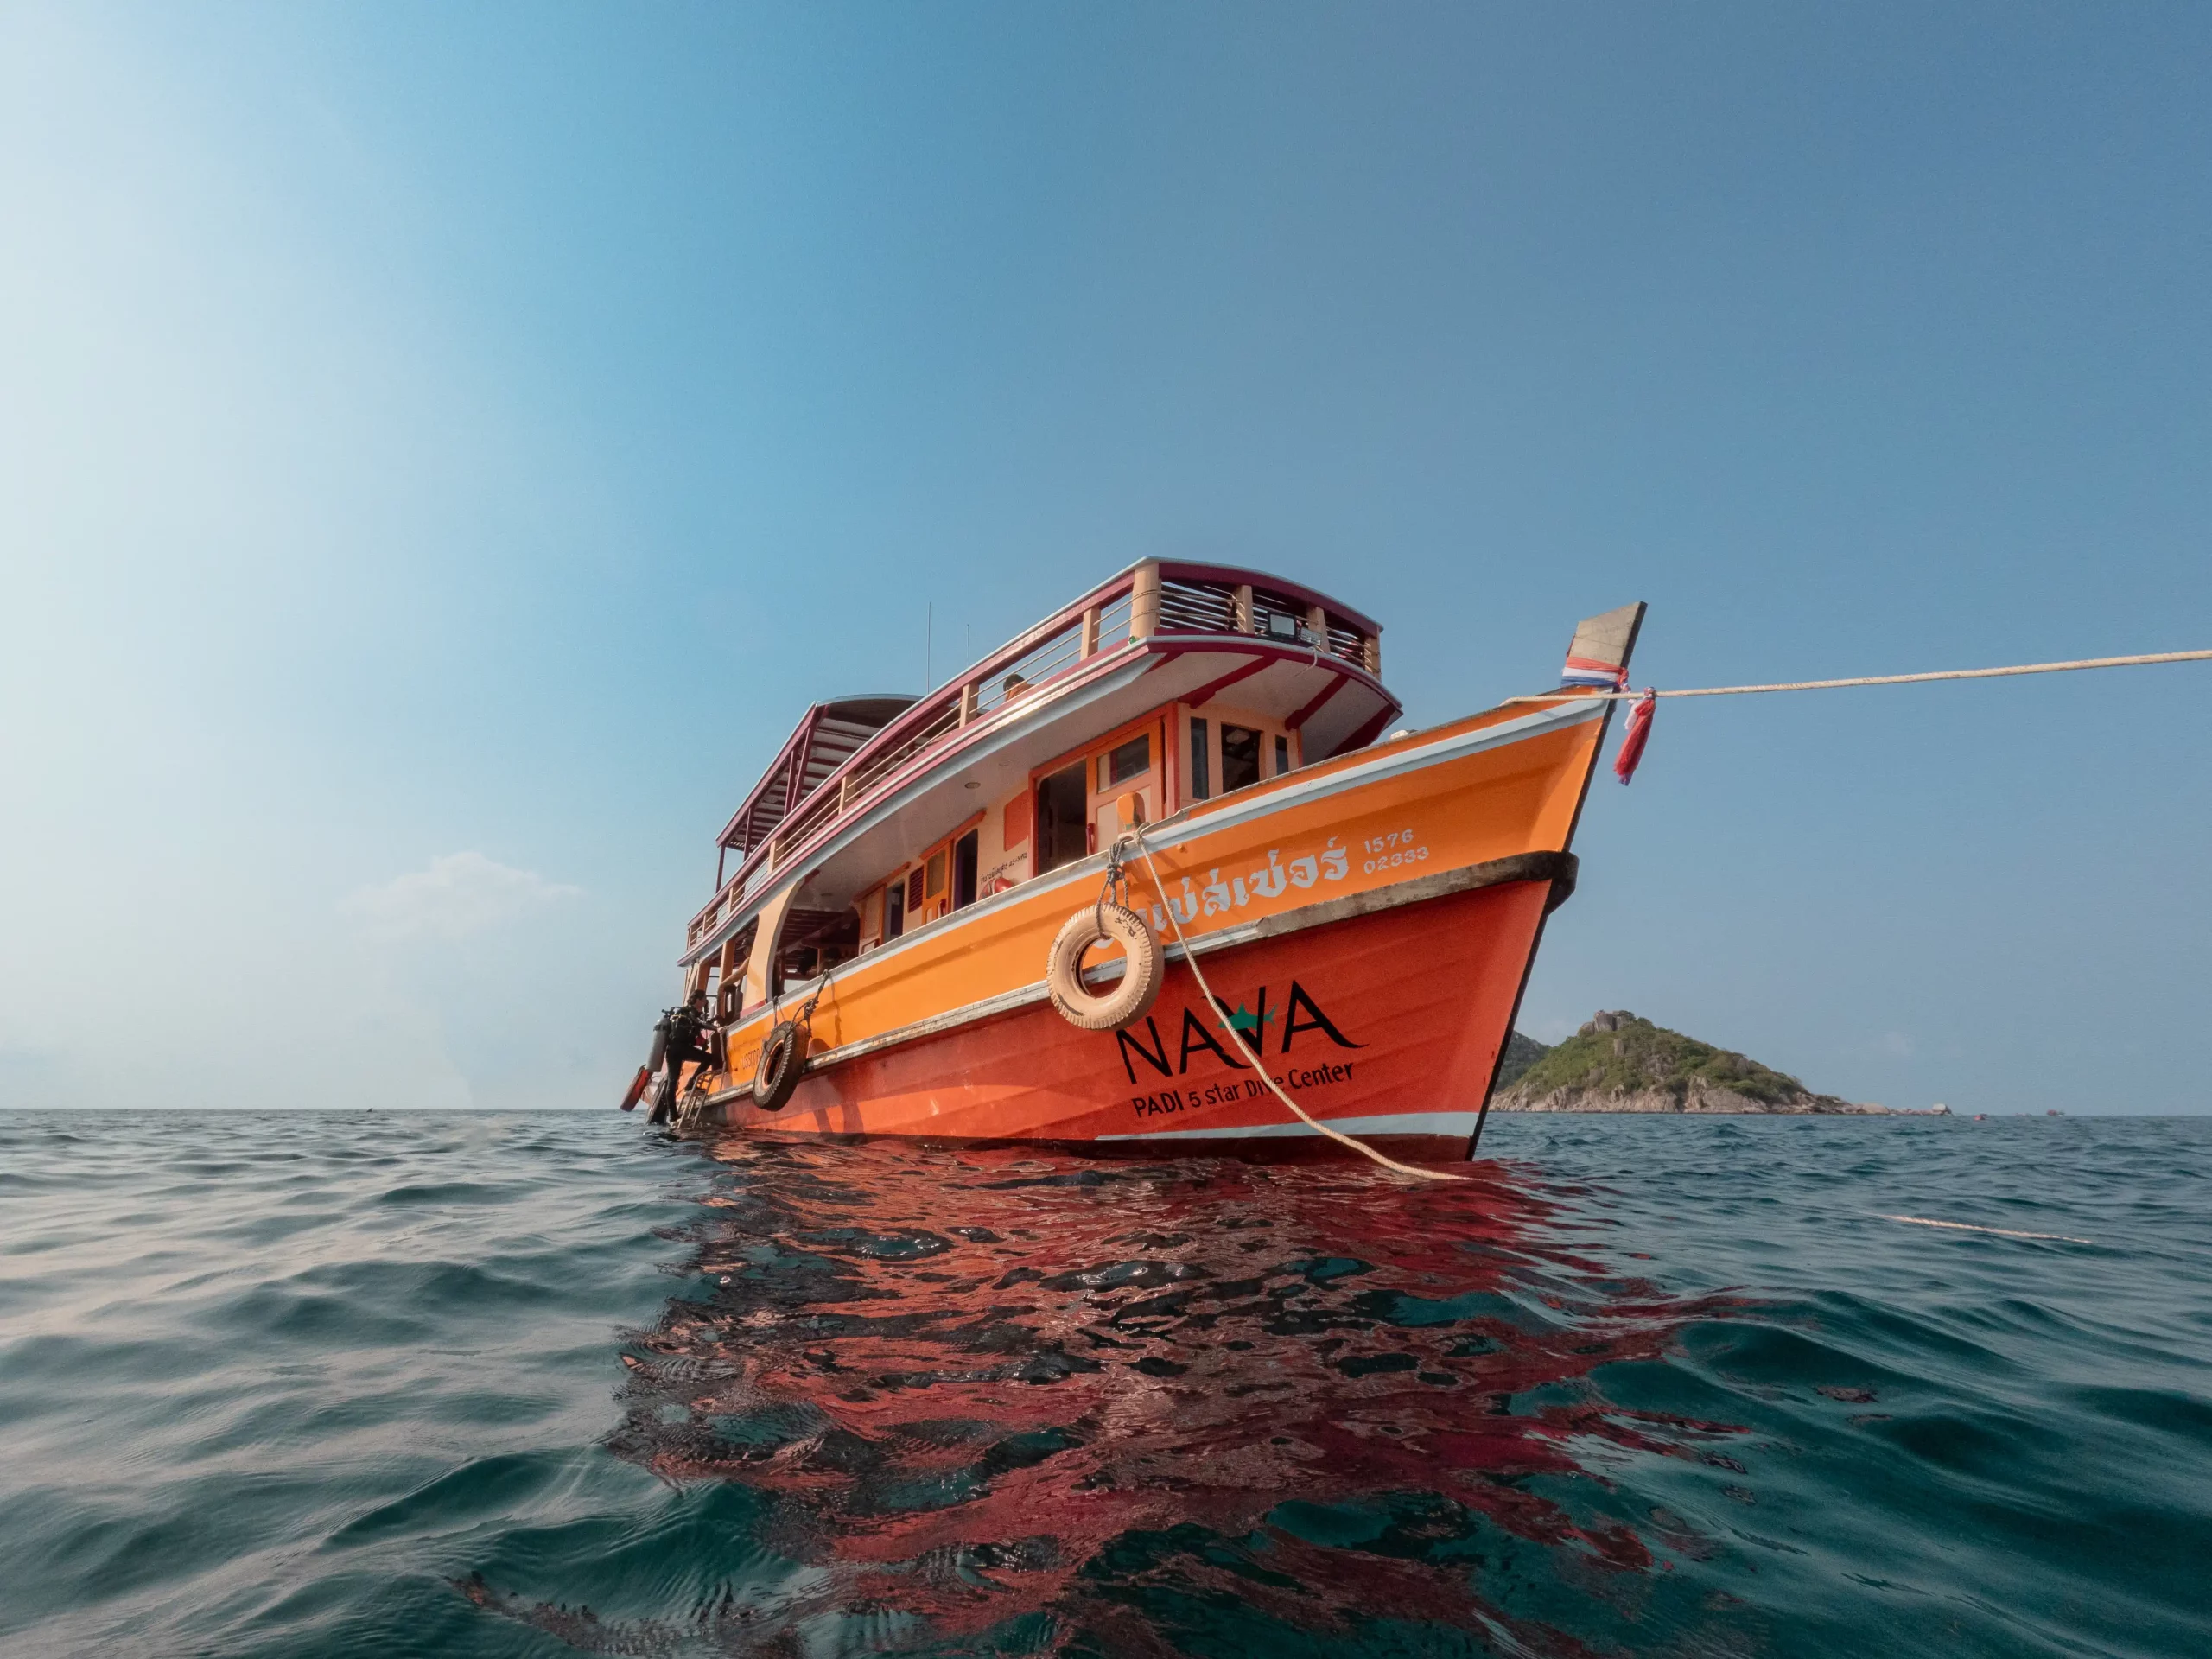 The front view of the Sunchaser dive boat by Nava Scuba Diving